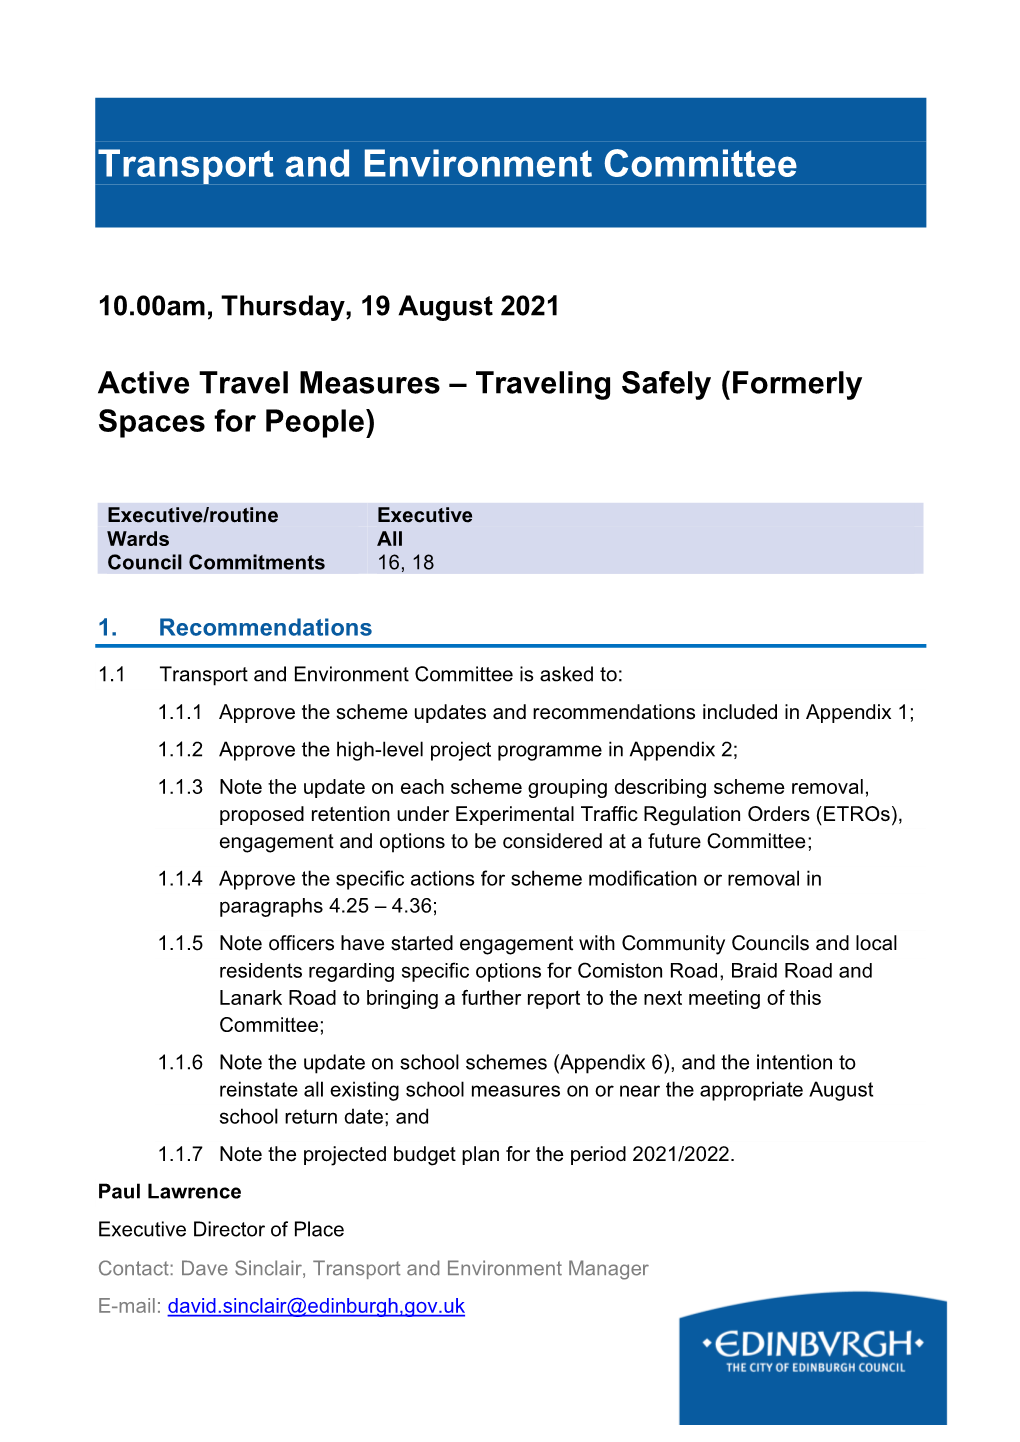 Active Travel Measures – Travelling Safely